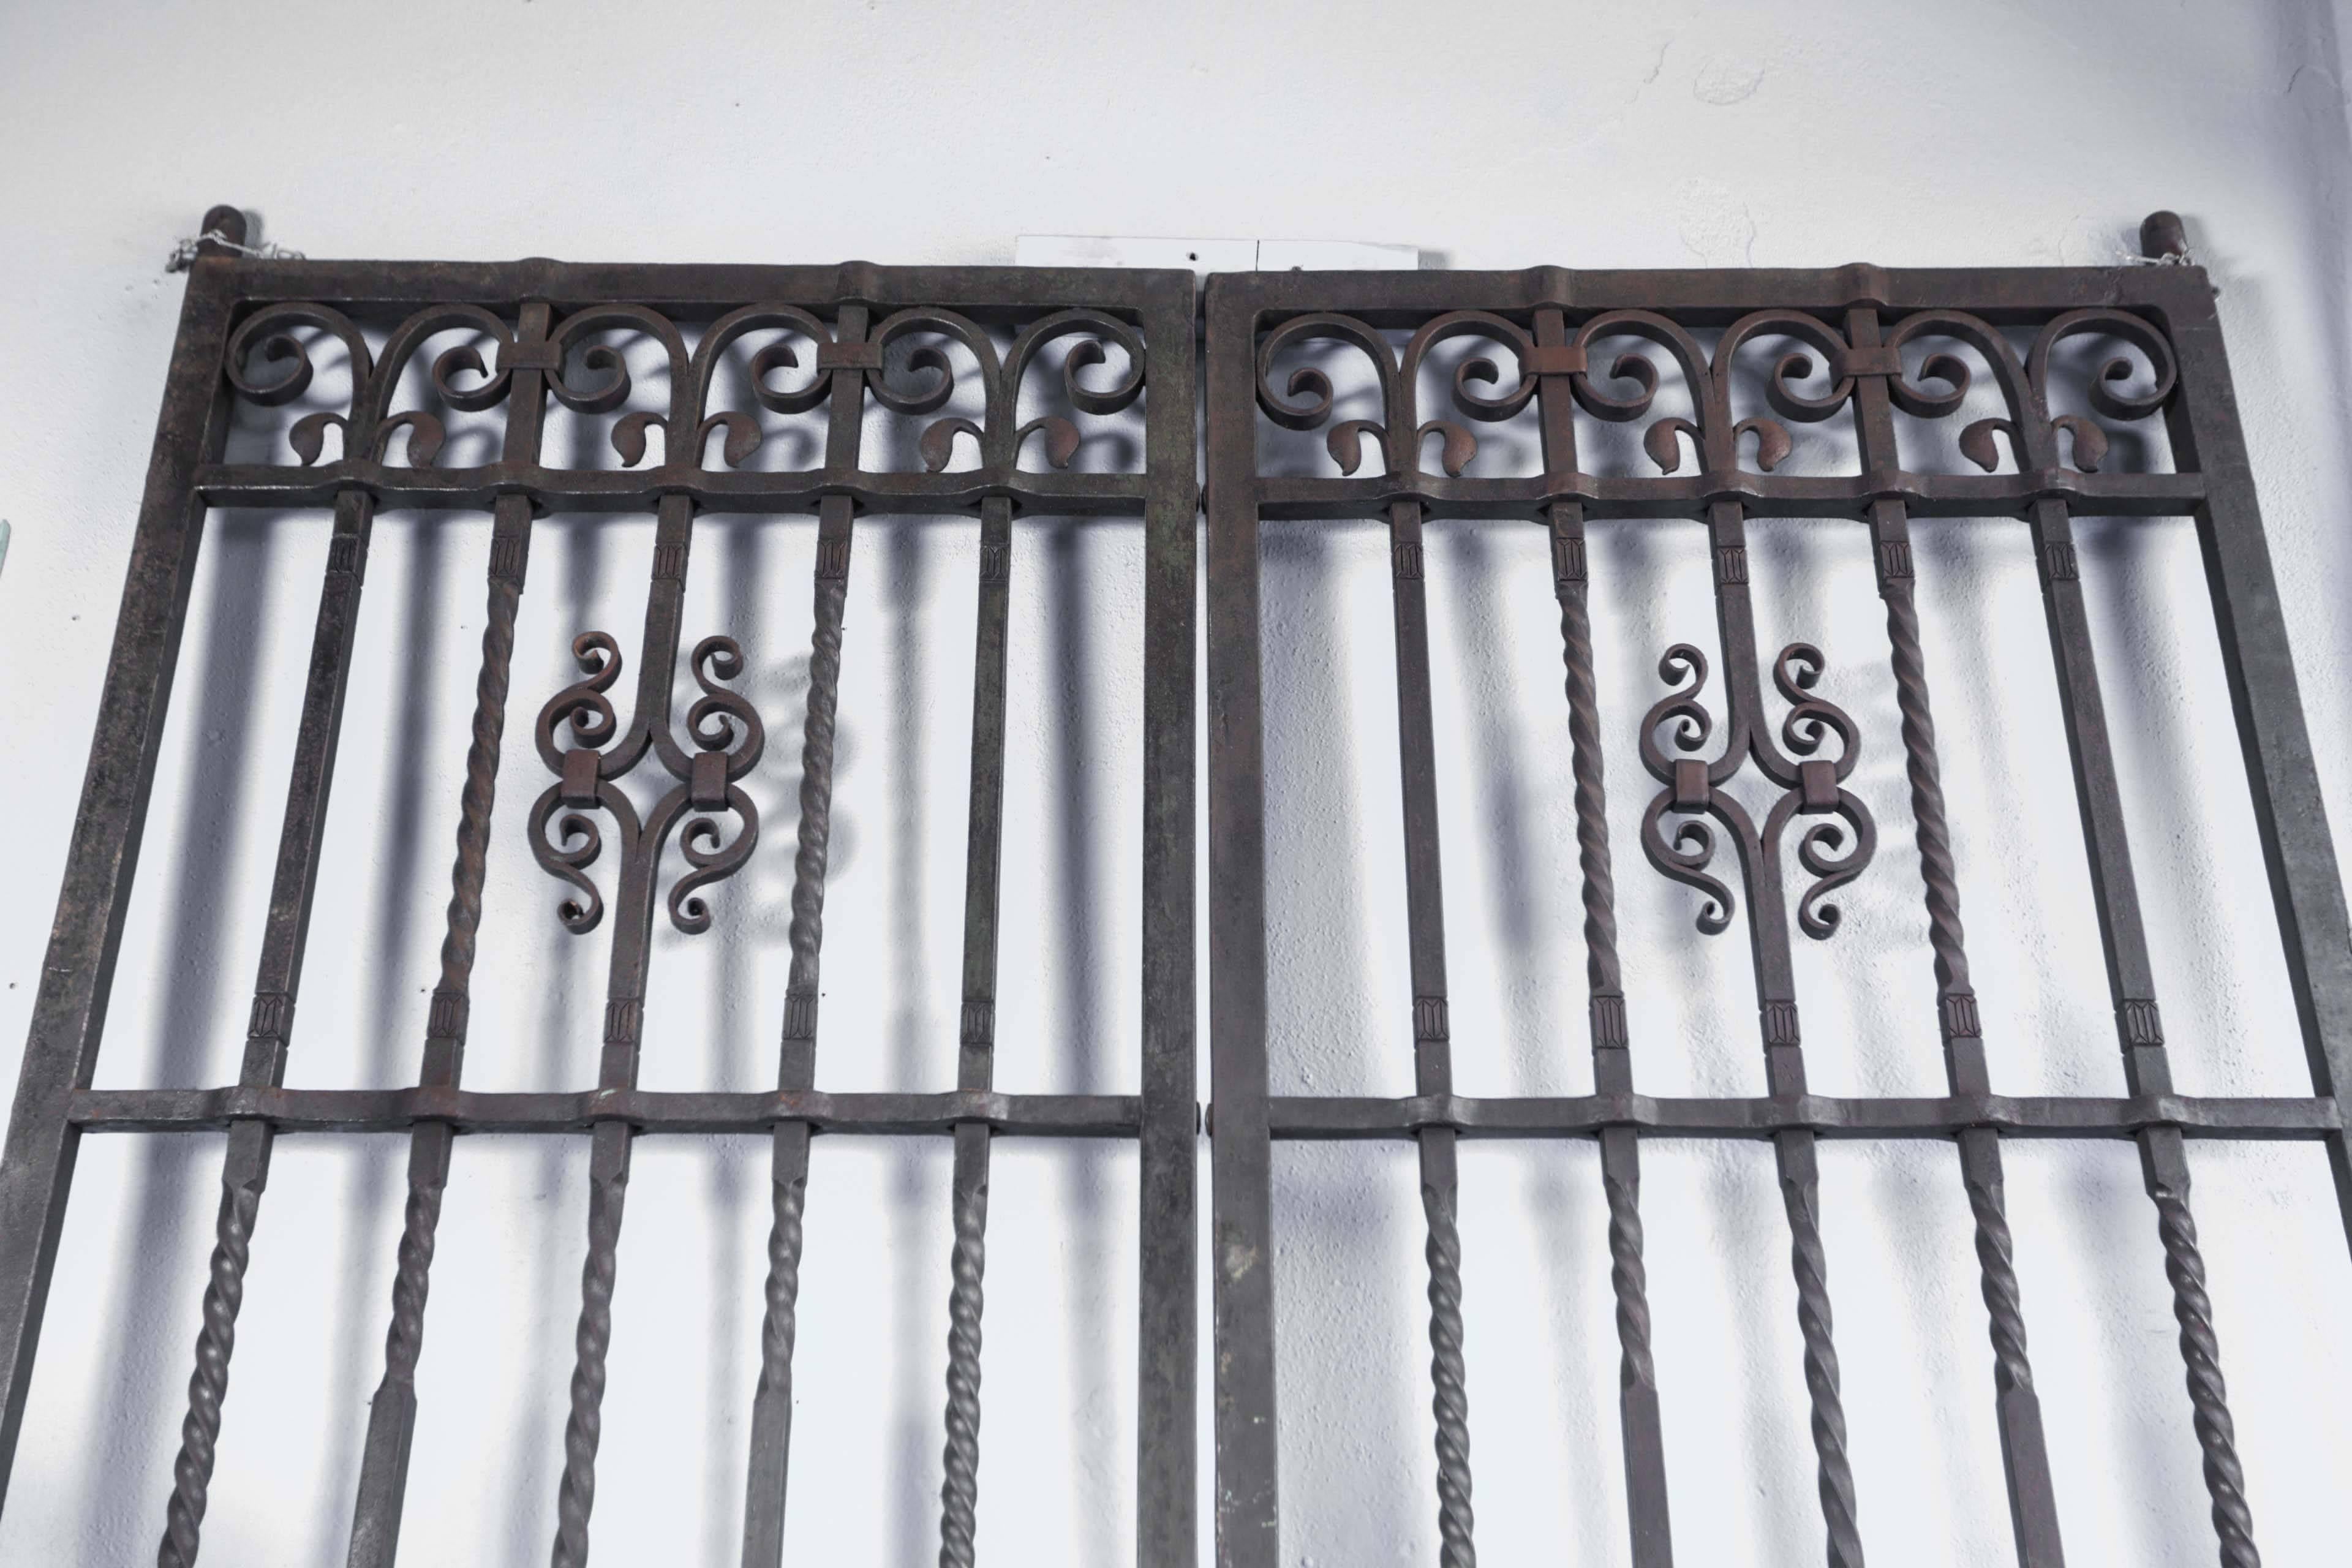 Pair of 1910 wrought iron gates by Samuel Yellin, considered to be one of the greatest artist blacksmiths. Salvaged from a Philadelphia bank. The frame of each door is exactly 118.25 in. tall and 35 in. wide, and the frame itself is 1.25 in. thick.